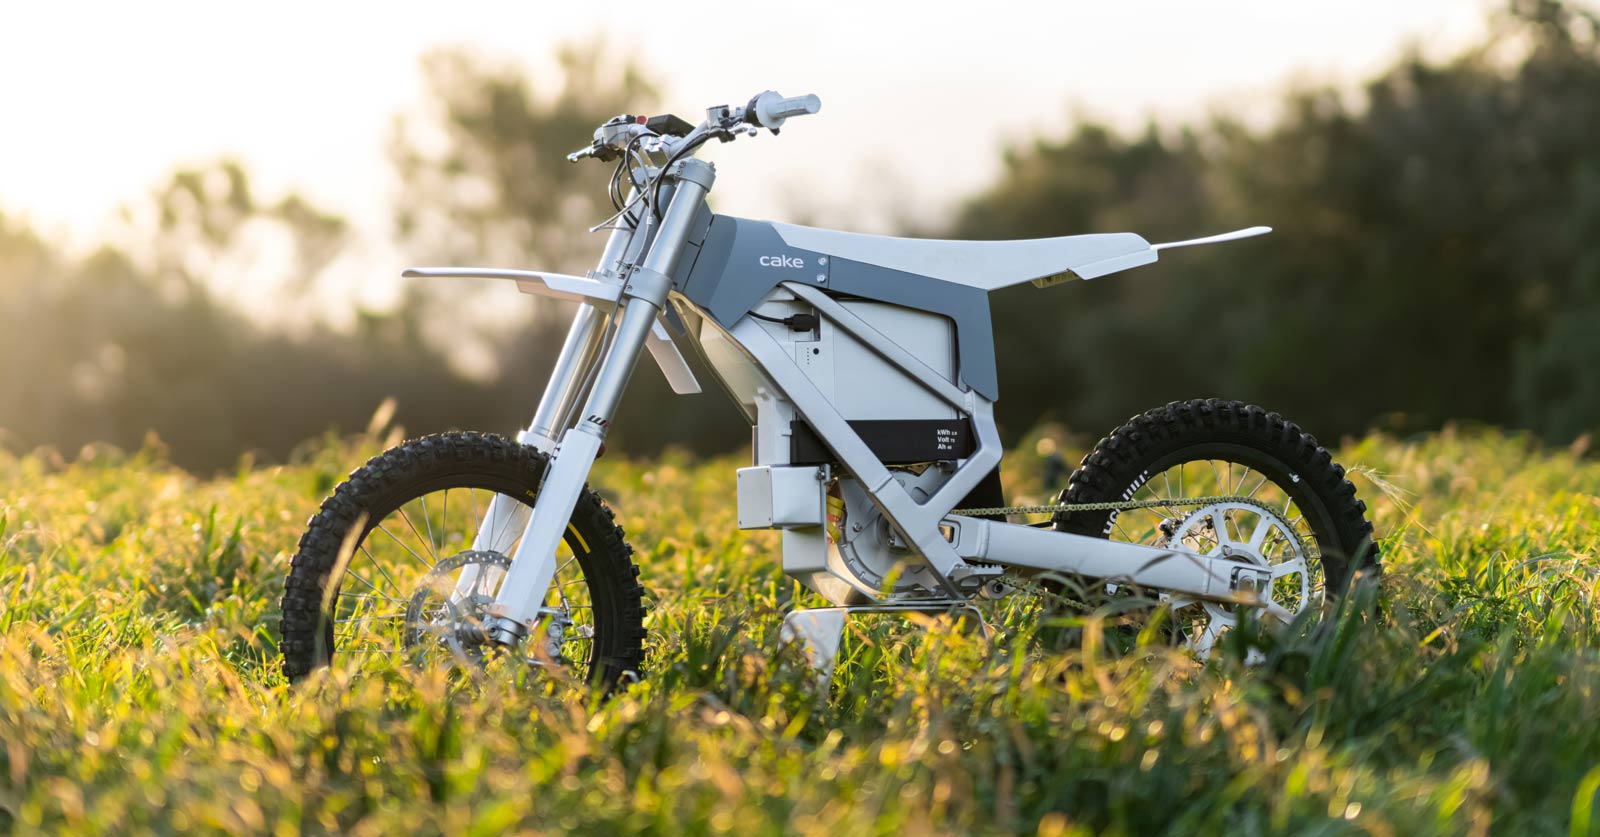 CAKE: a dirt bike with a difference - Kvaser - Advanced CAN Solutions